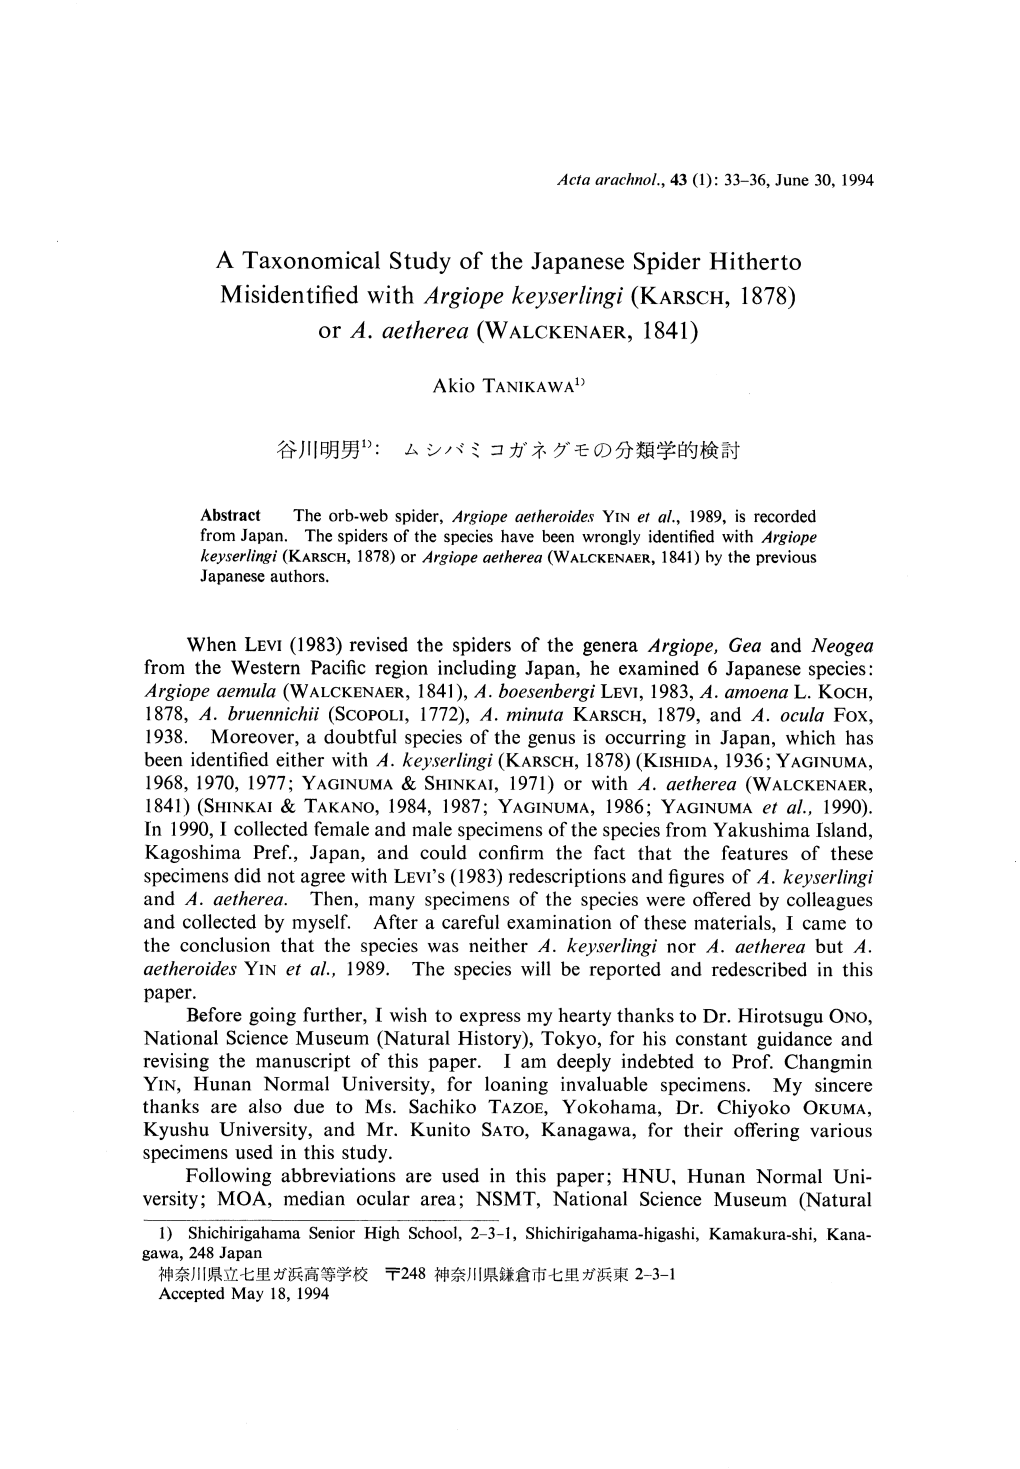 A Taxonomical Study of the Japanese Spider Hitherto Misidentified with Argiope Keyserlingi (KARSCH, 1878) Or A, Aetherea (WALCKE